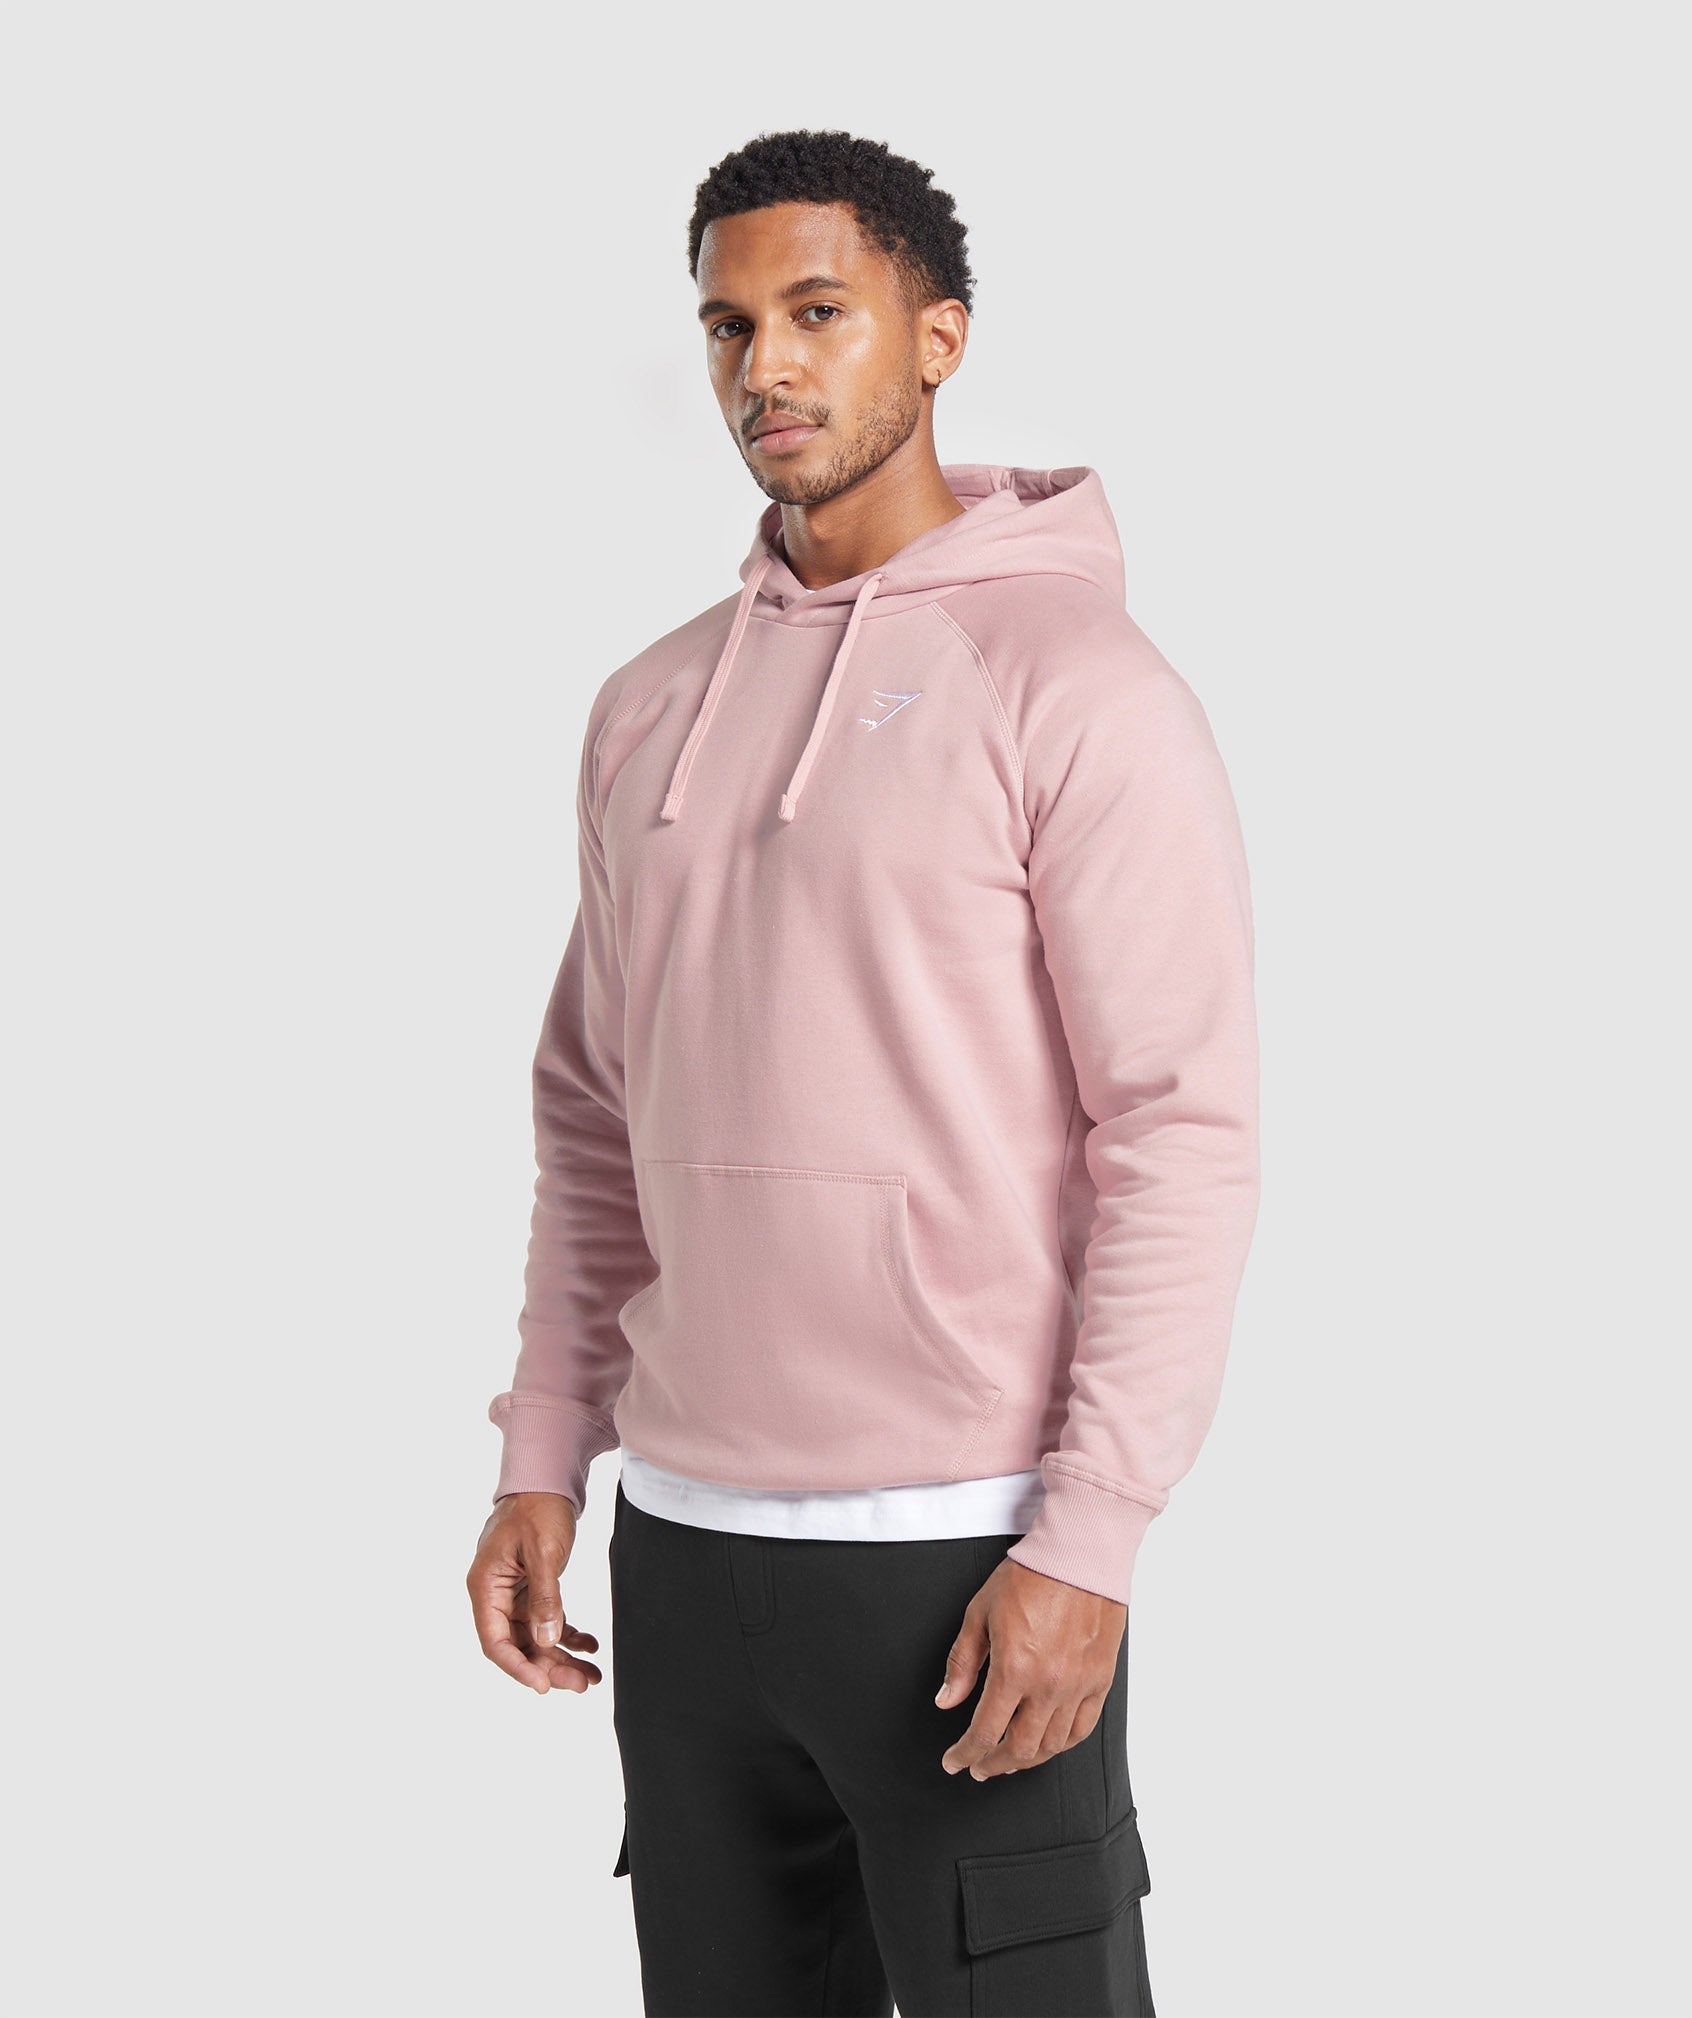 Crest Hoodie in Light Pink - view 3